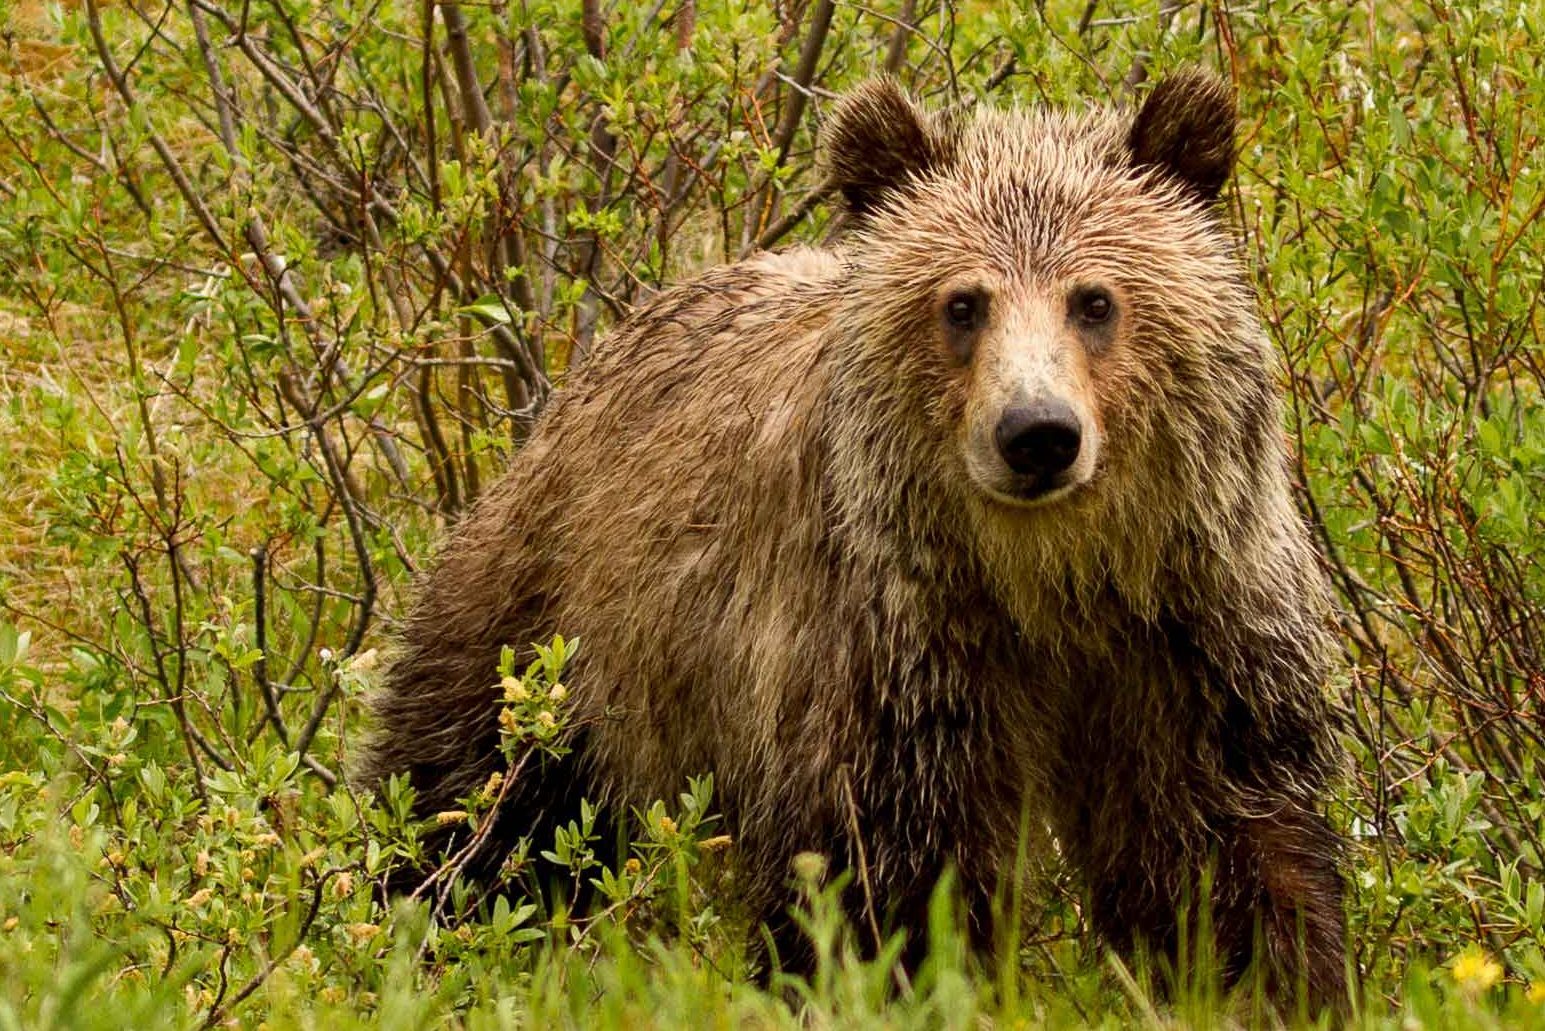 Featured image for “Manitoba Grizzly Bears Need Your Help”